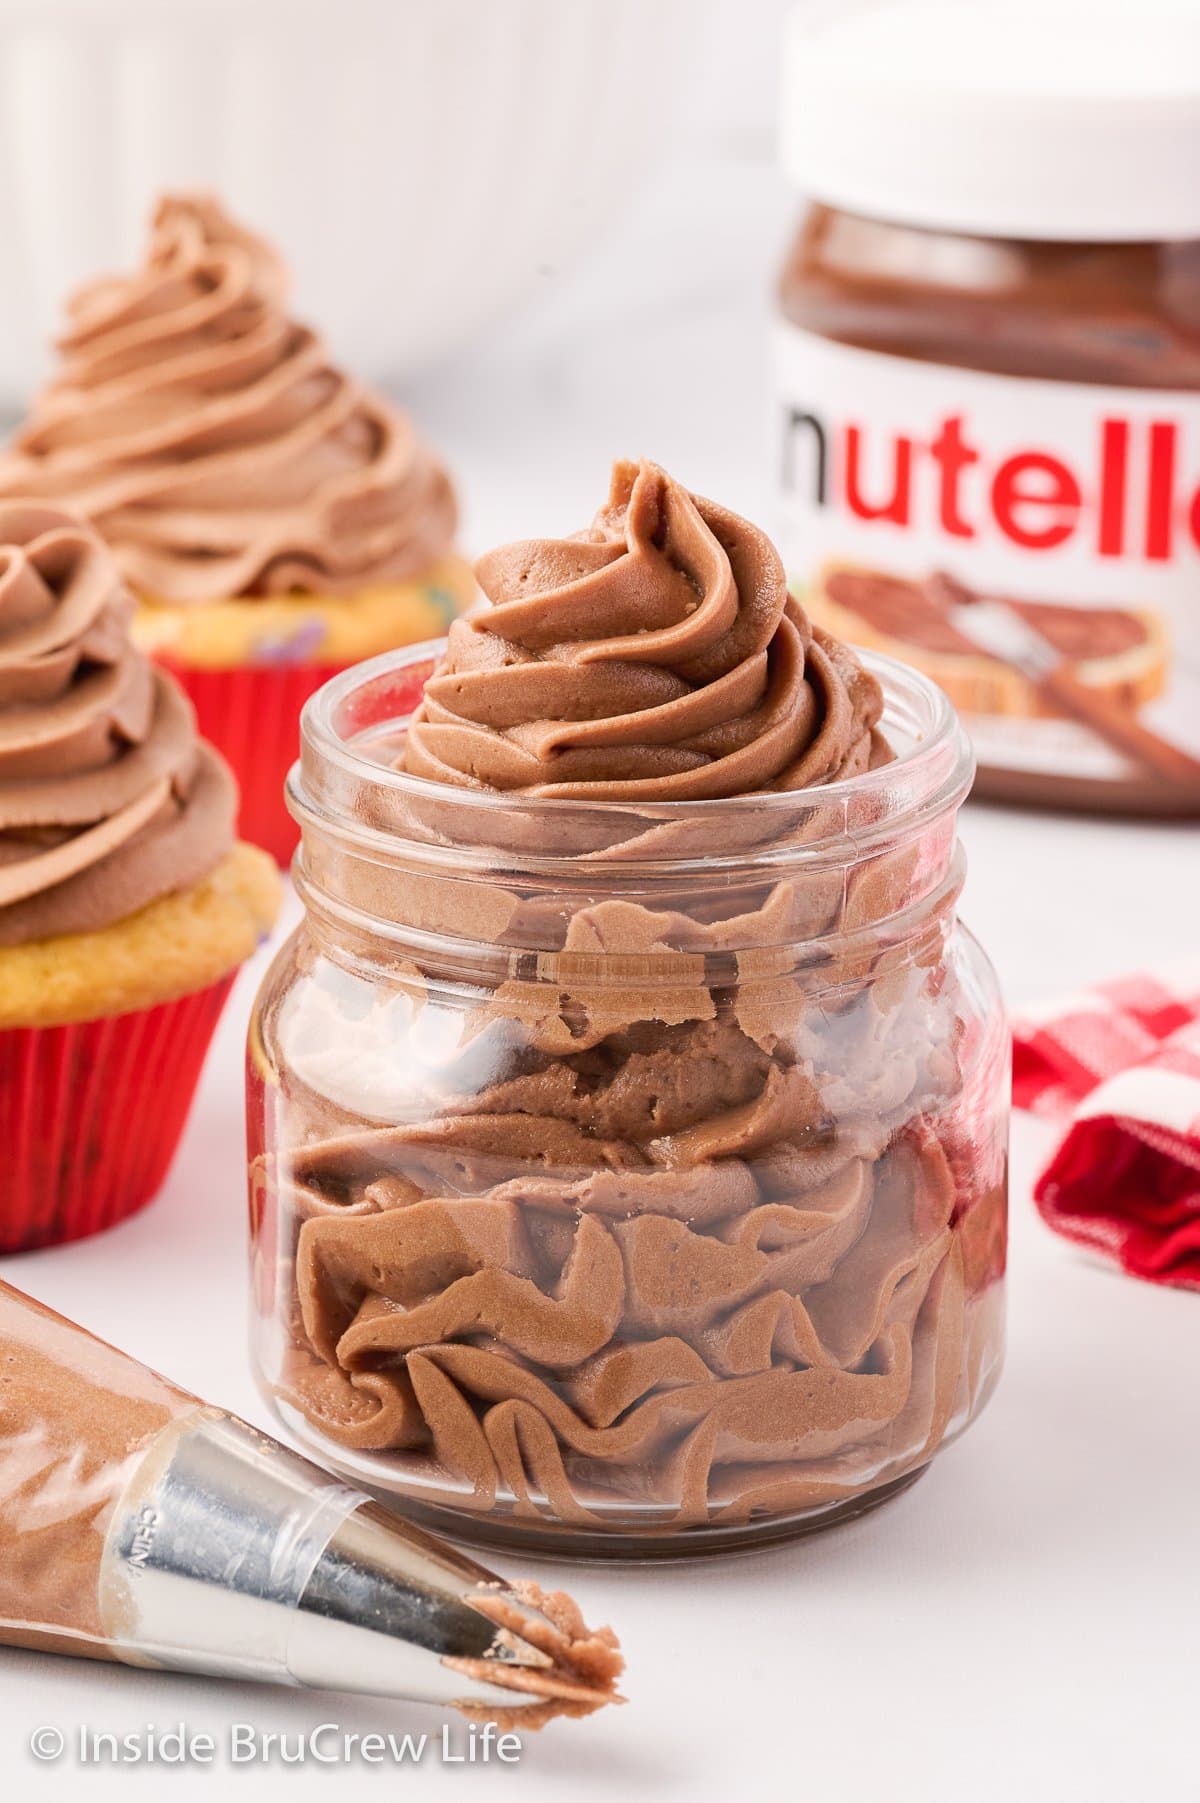 A clear jar filled with a swirl of chocolate Nutella frosting.